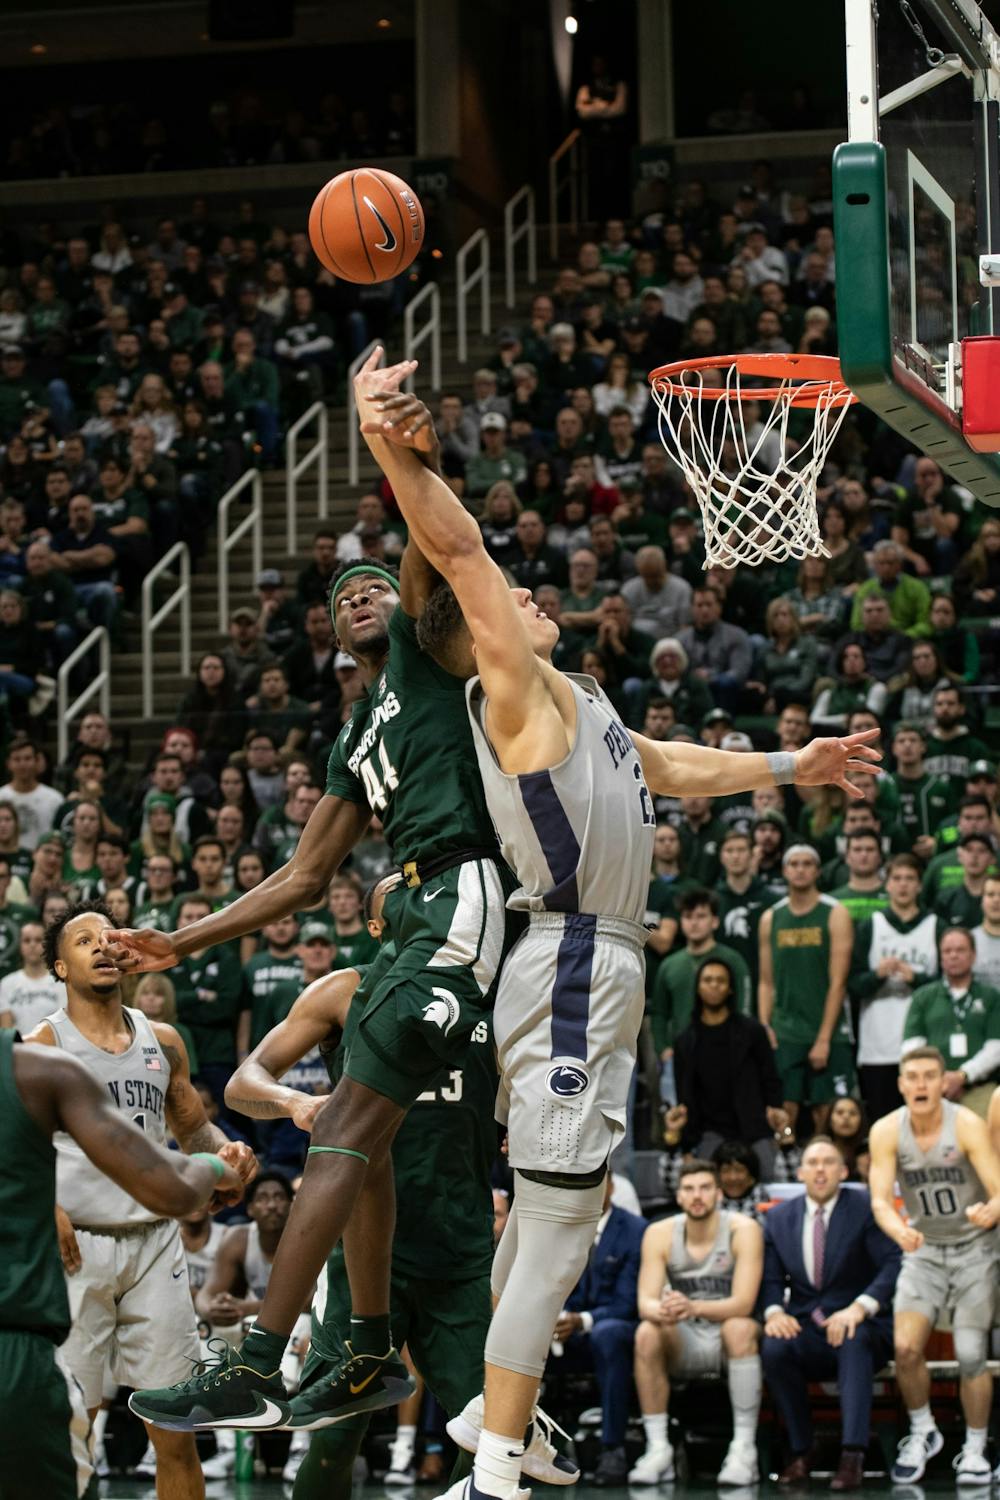 MSU forward Gabe Brown (44) fights for possession of the ball during a basketball game against Penn State at the Breslin Center on Feb. 4, 2020. The Spartans fell to the Nittany Lions, 70-75.